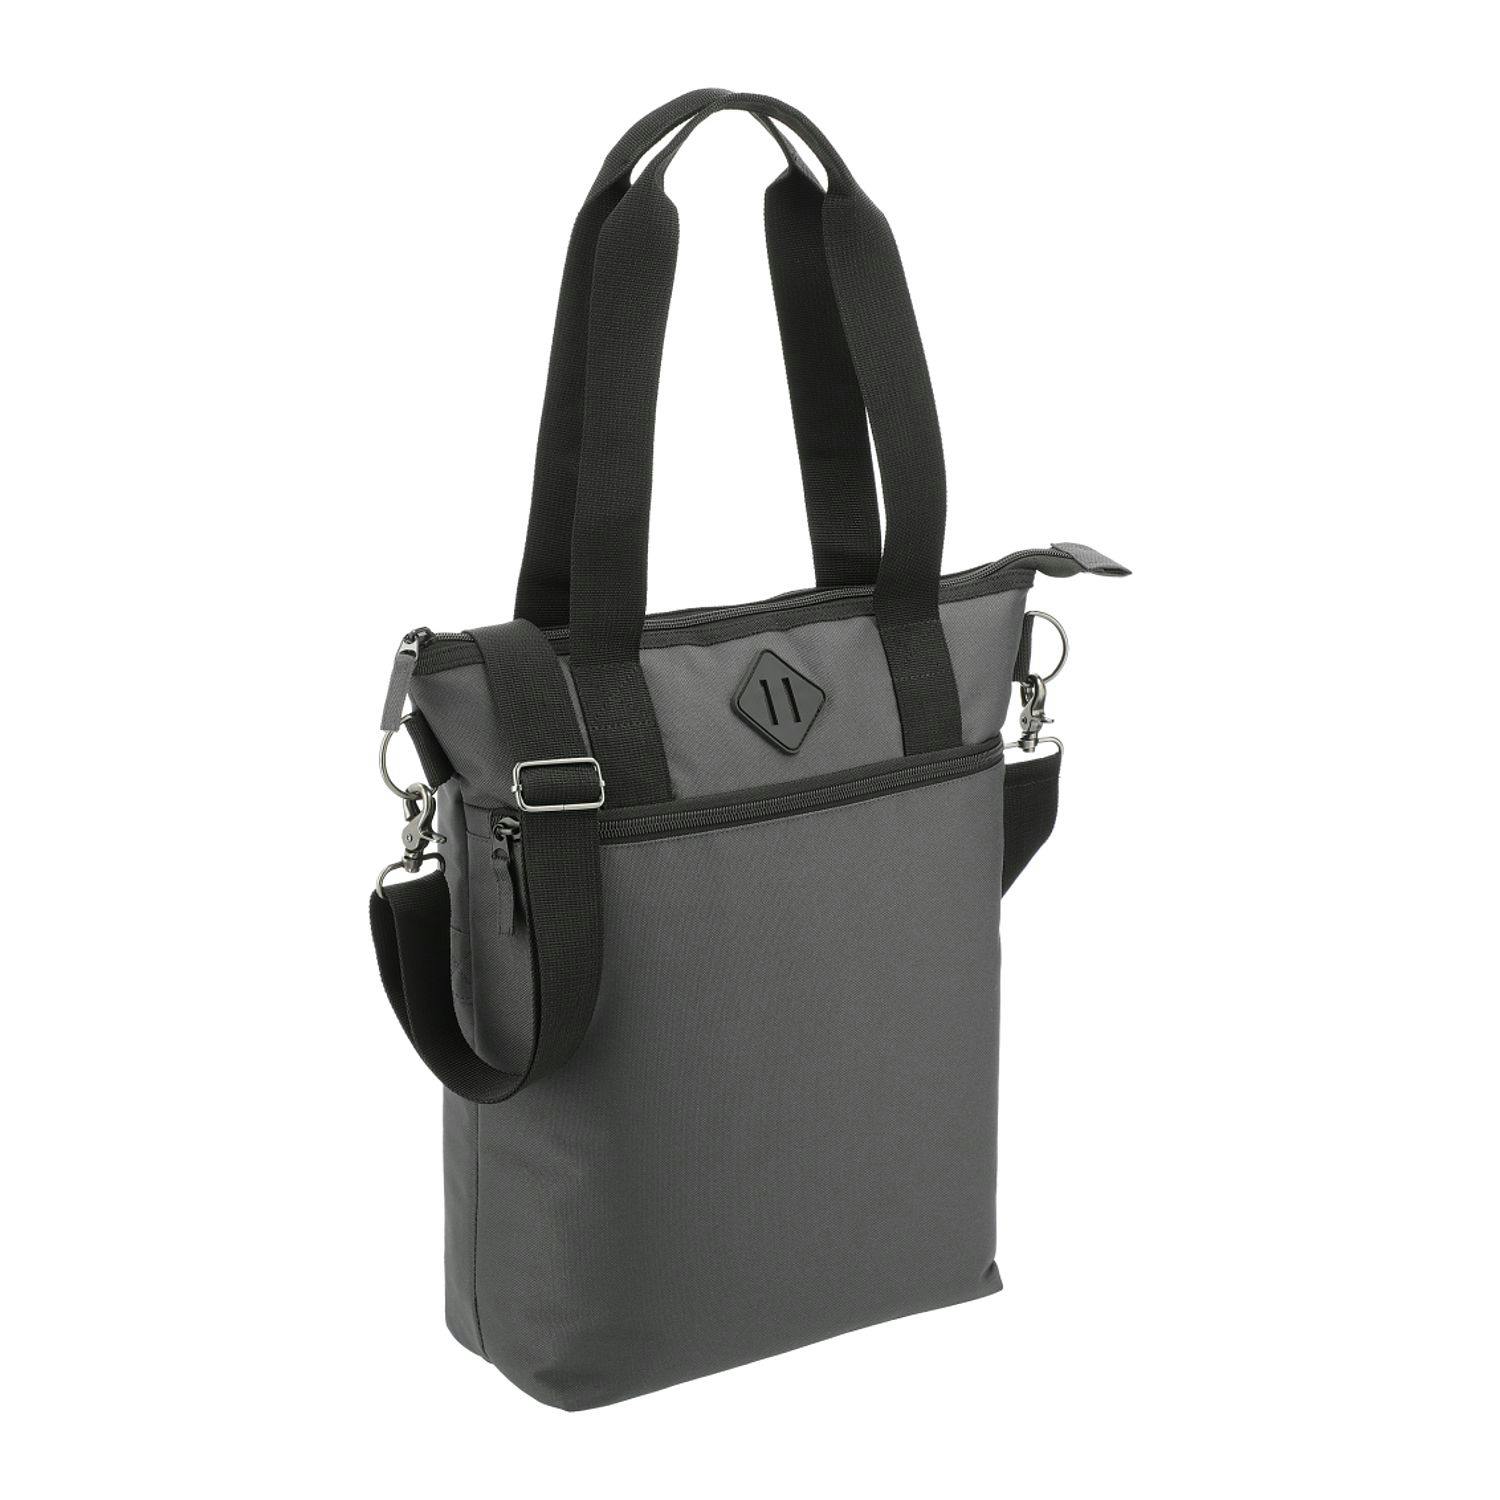 Repreve® Ocean Computer Tote - additional Image 2